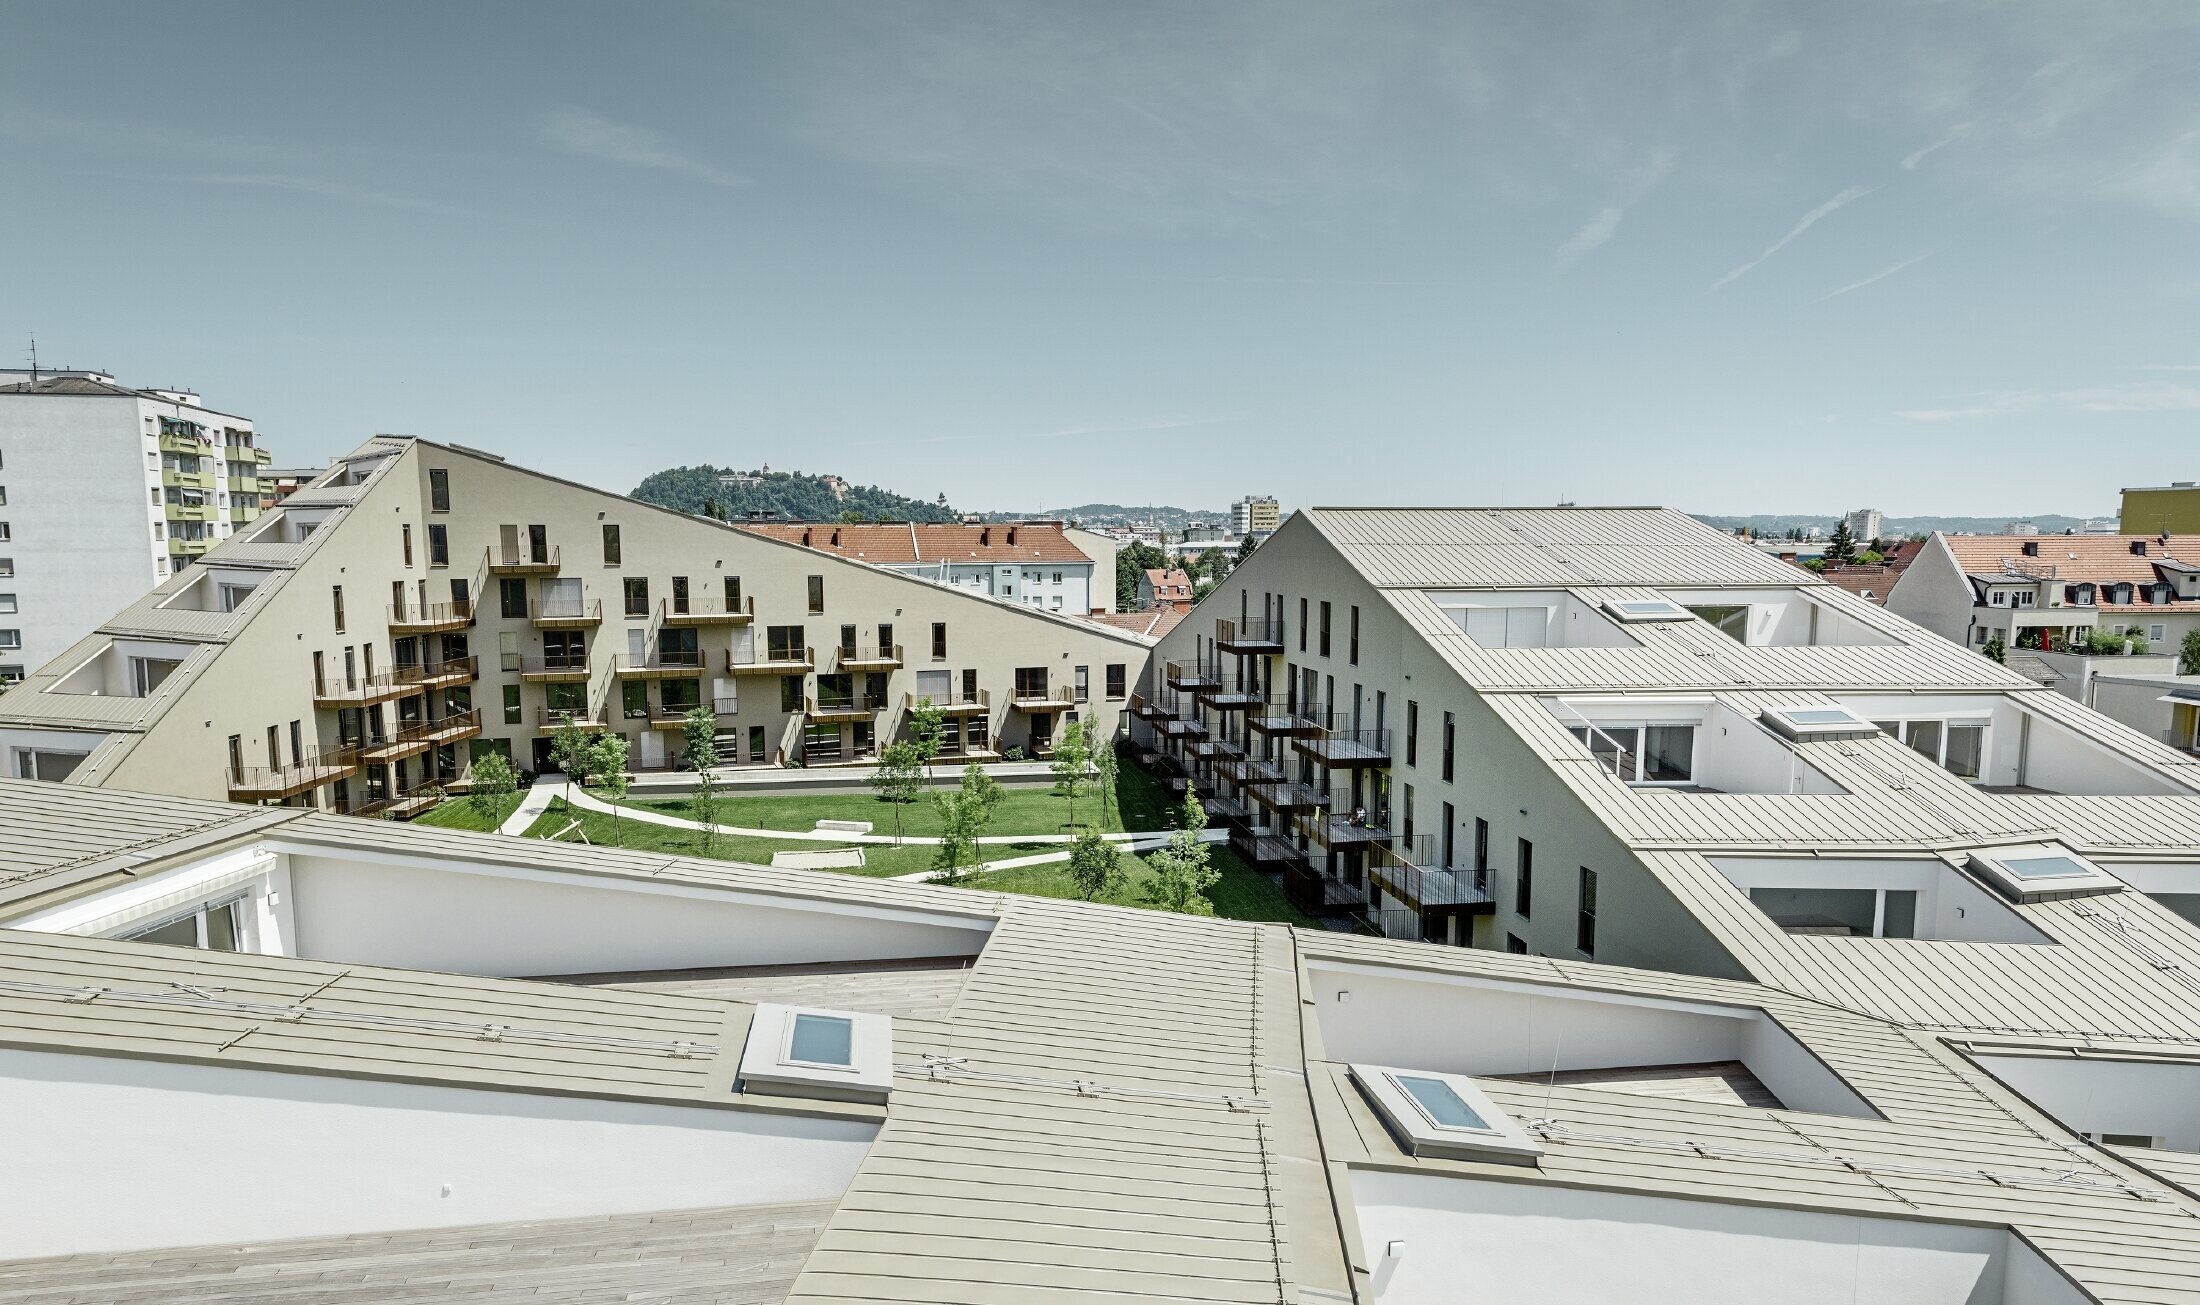 Extended residential complex with a flat roof surface and integrated terraces, generous windows and a Prefalz roof in the special colour of metallic bronze